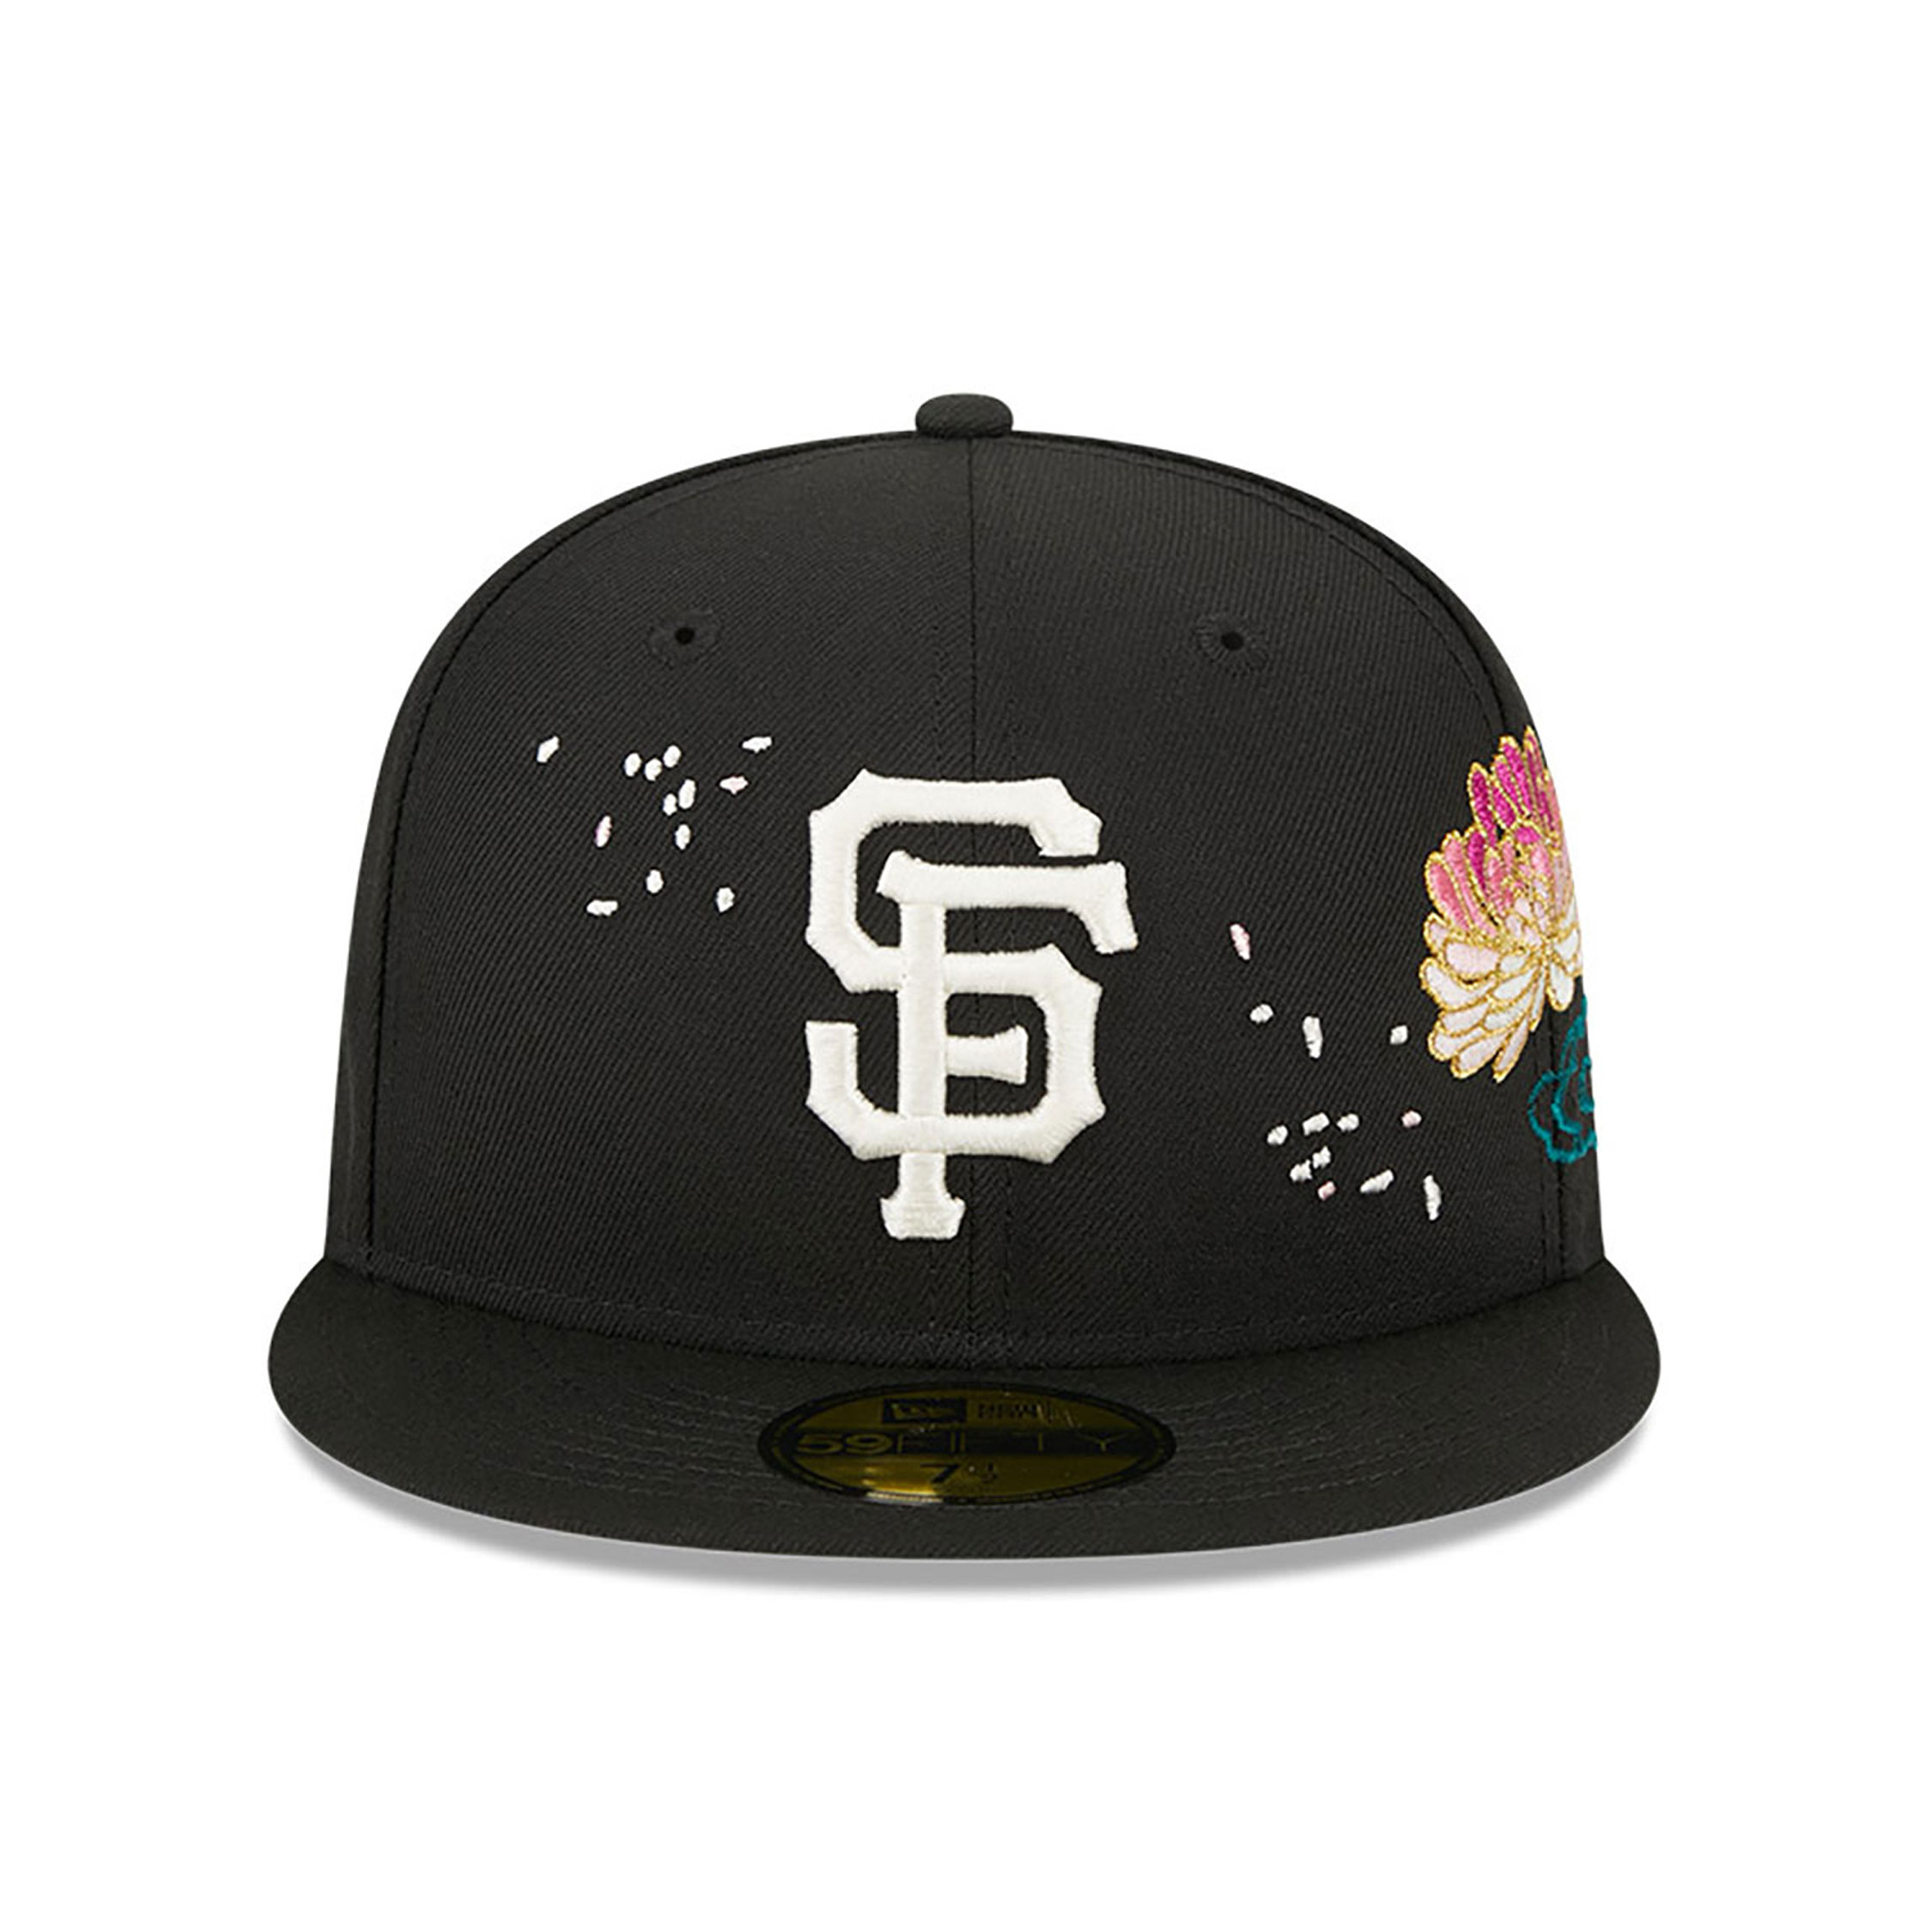 San Francisco Giants Cherry Blossom Black 59FIFTY Fitted Cap